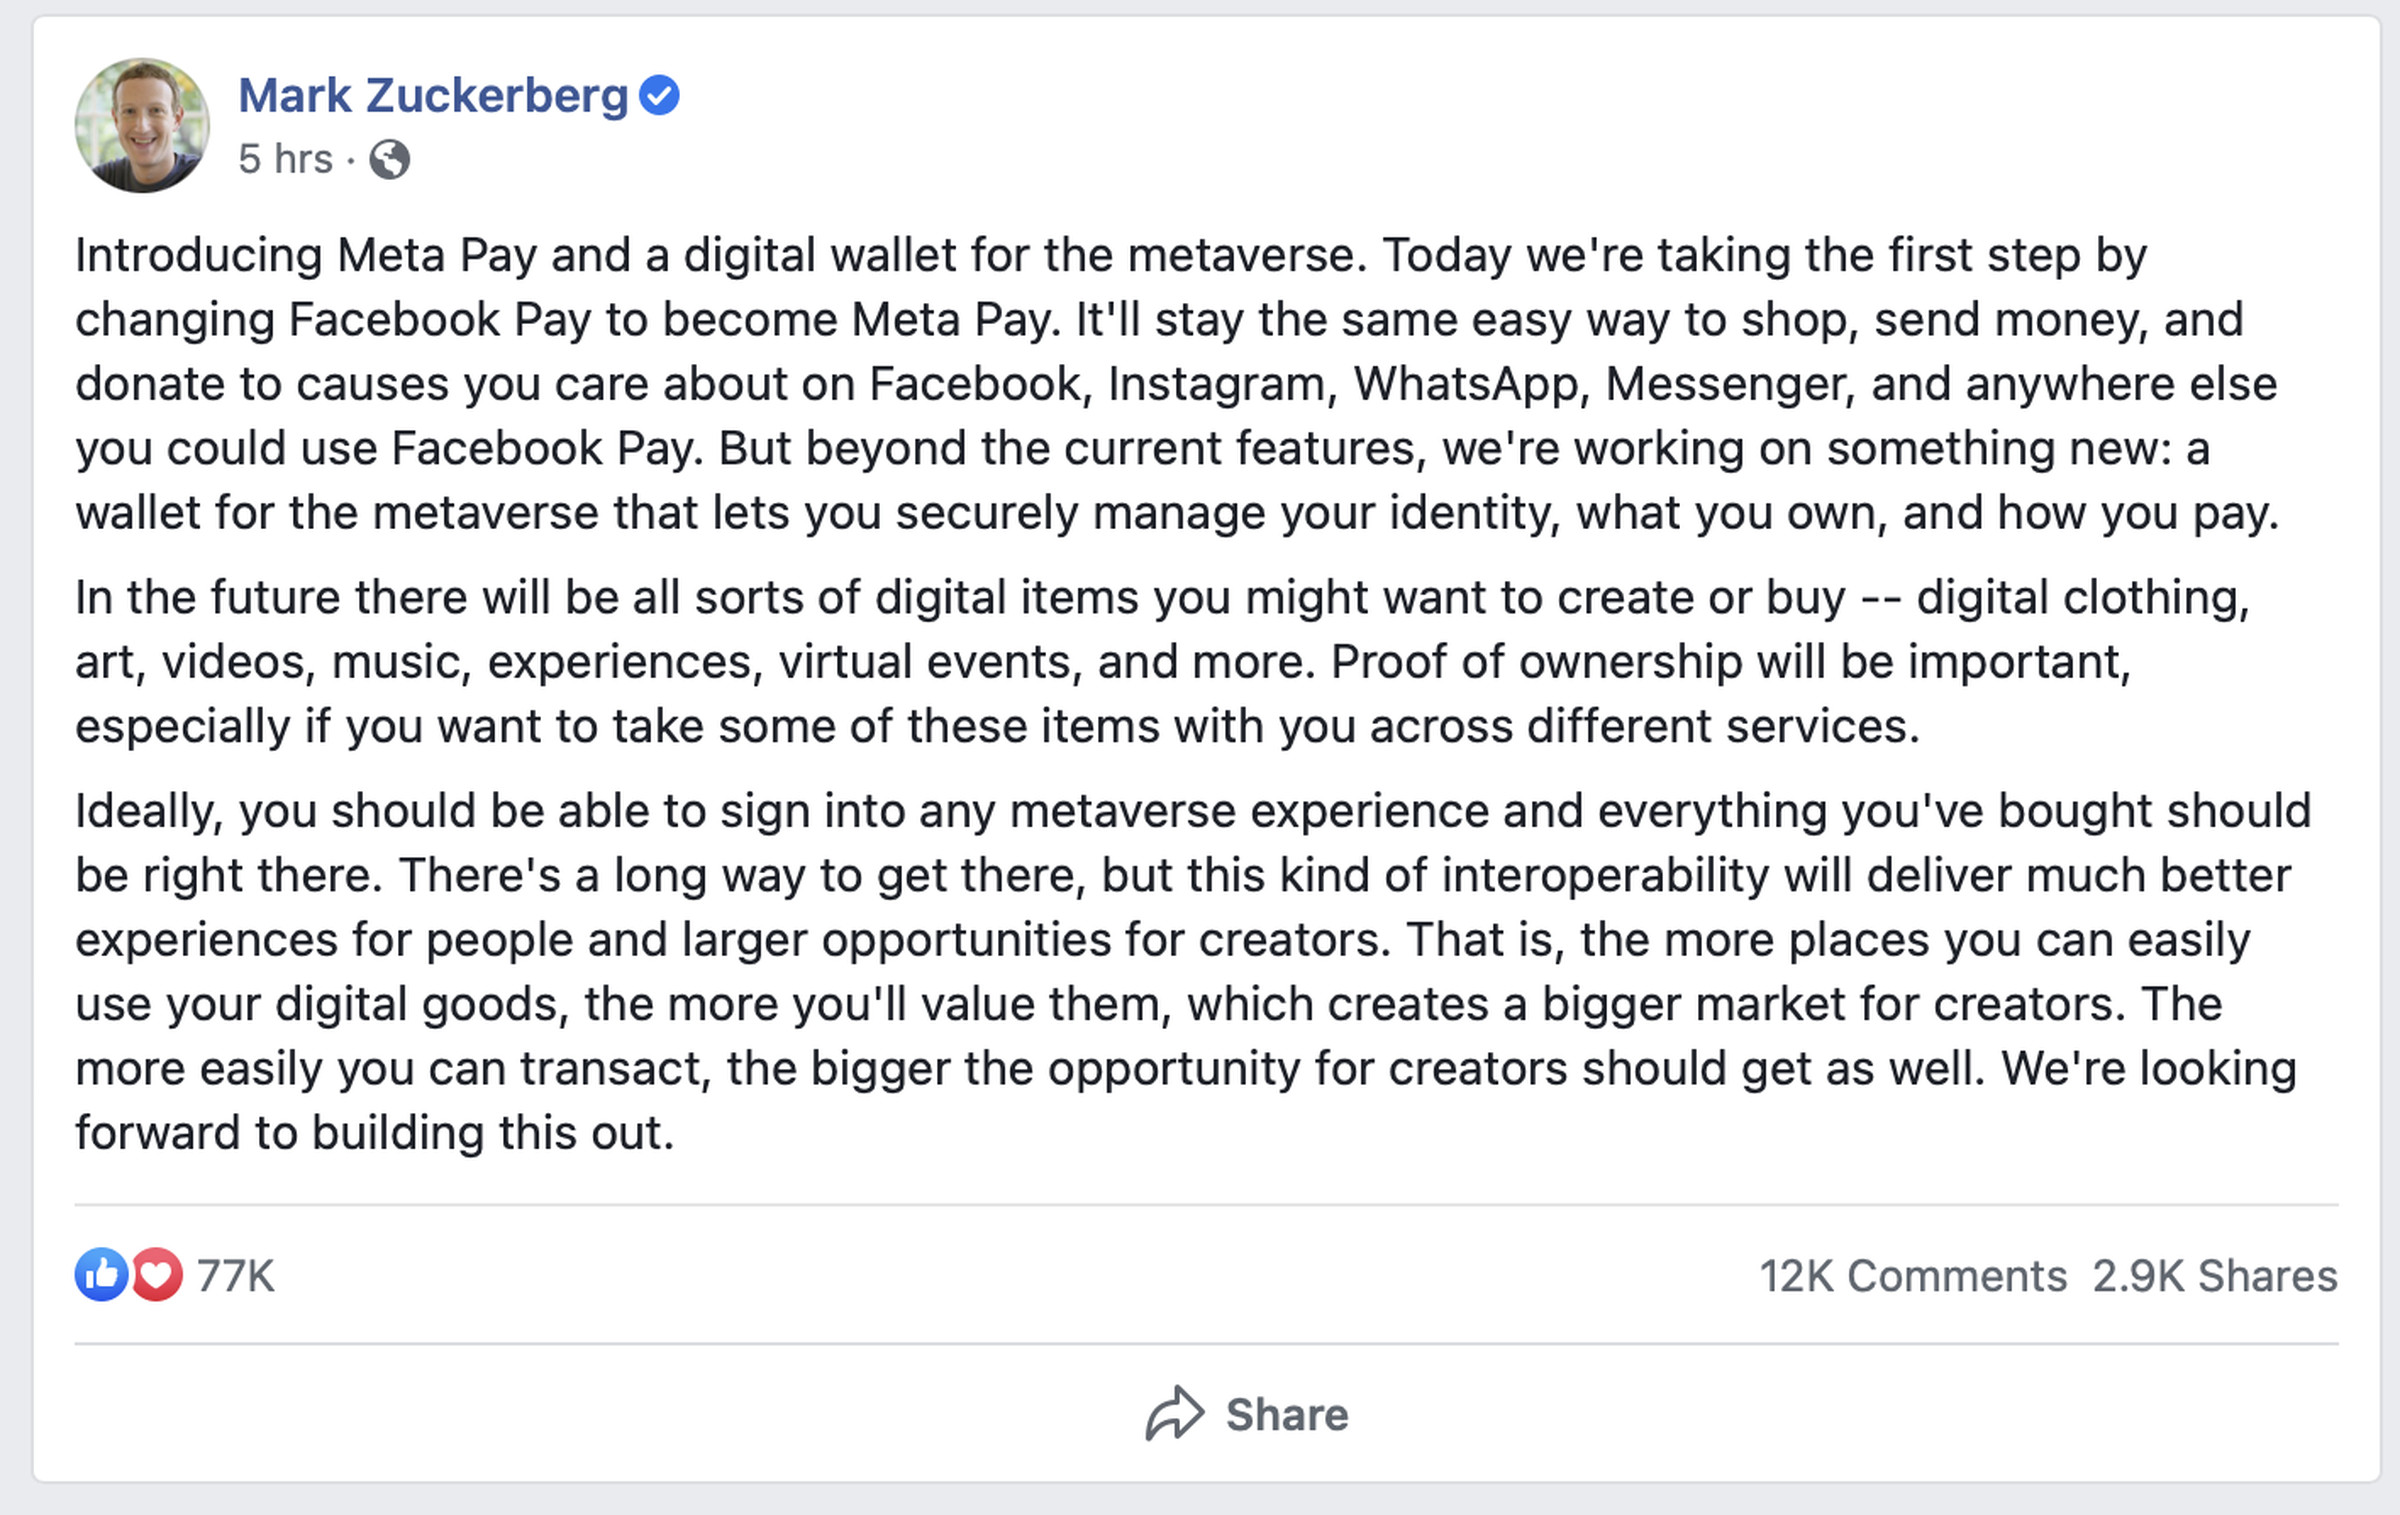 A Facebook post from Mark Zuckerberg, talking about the company’s plans for Meta Pay and a wallet for the metaverse.